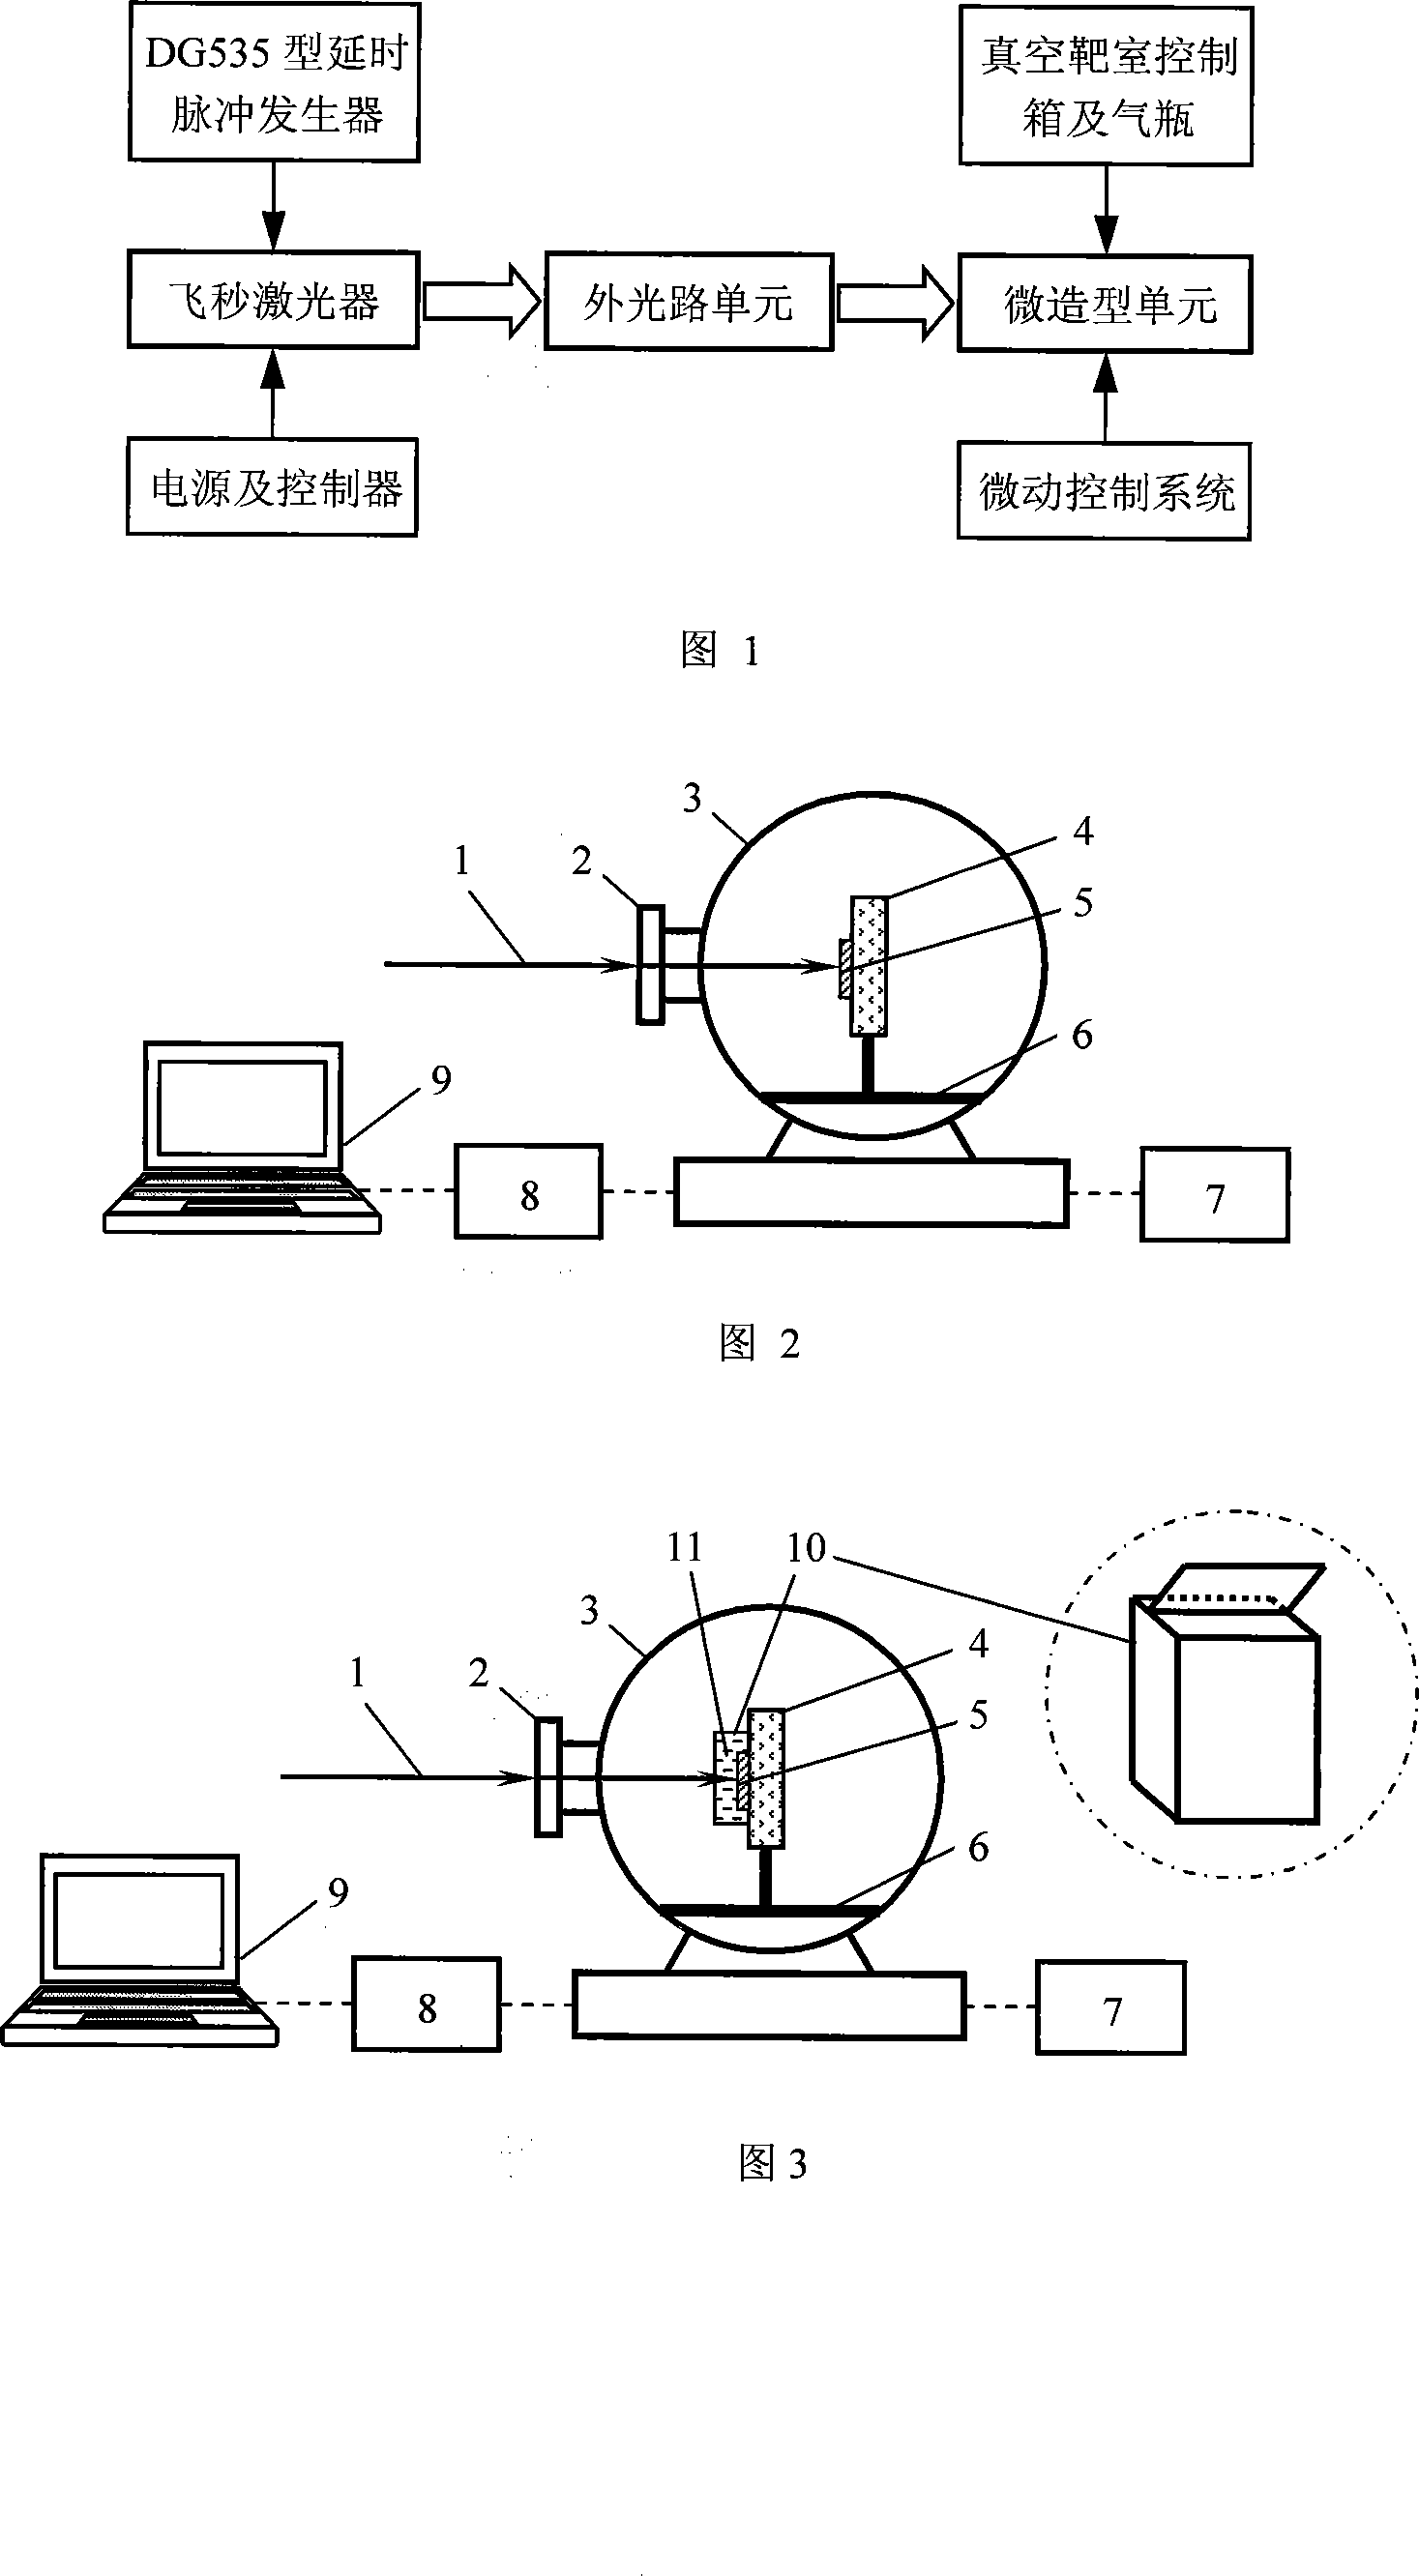 Laser modeling method for semiconductor material micro-nano multi-scale function surface